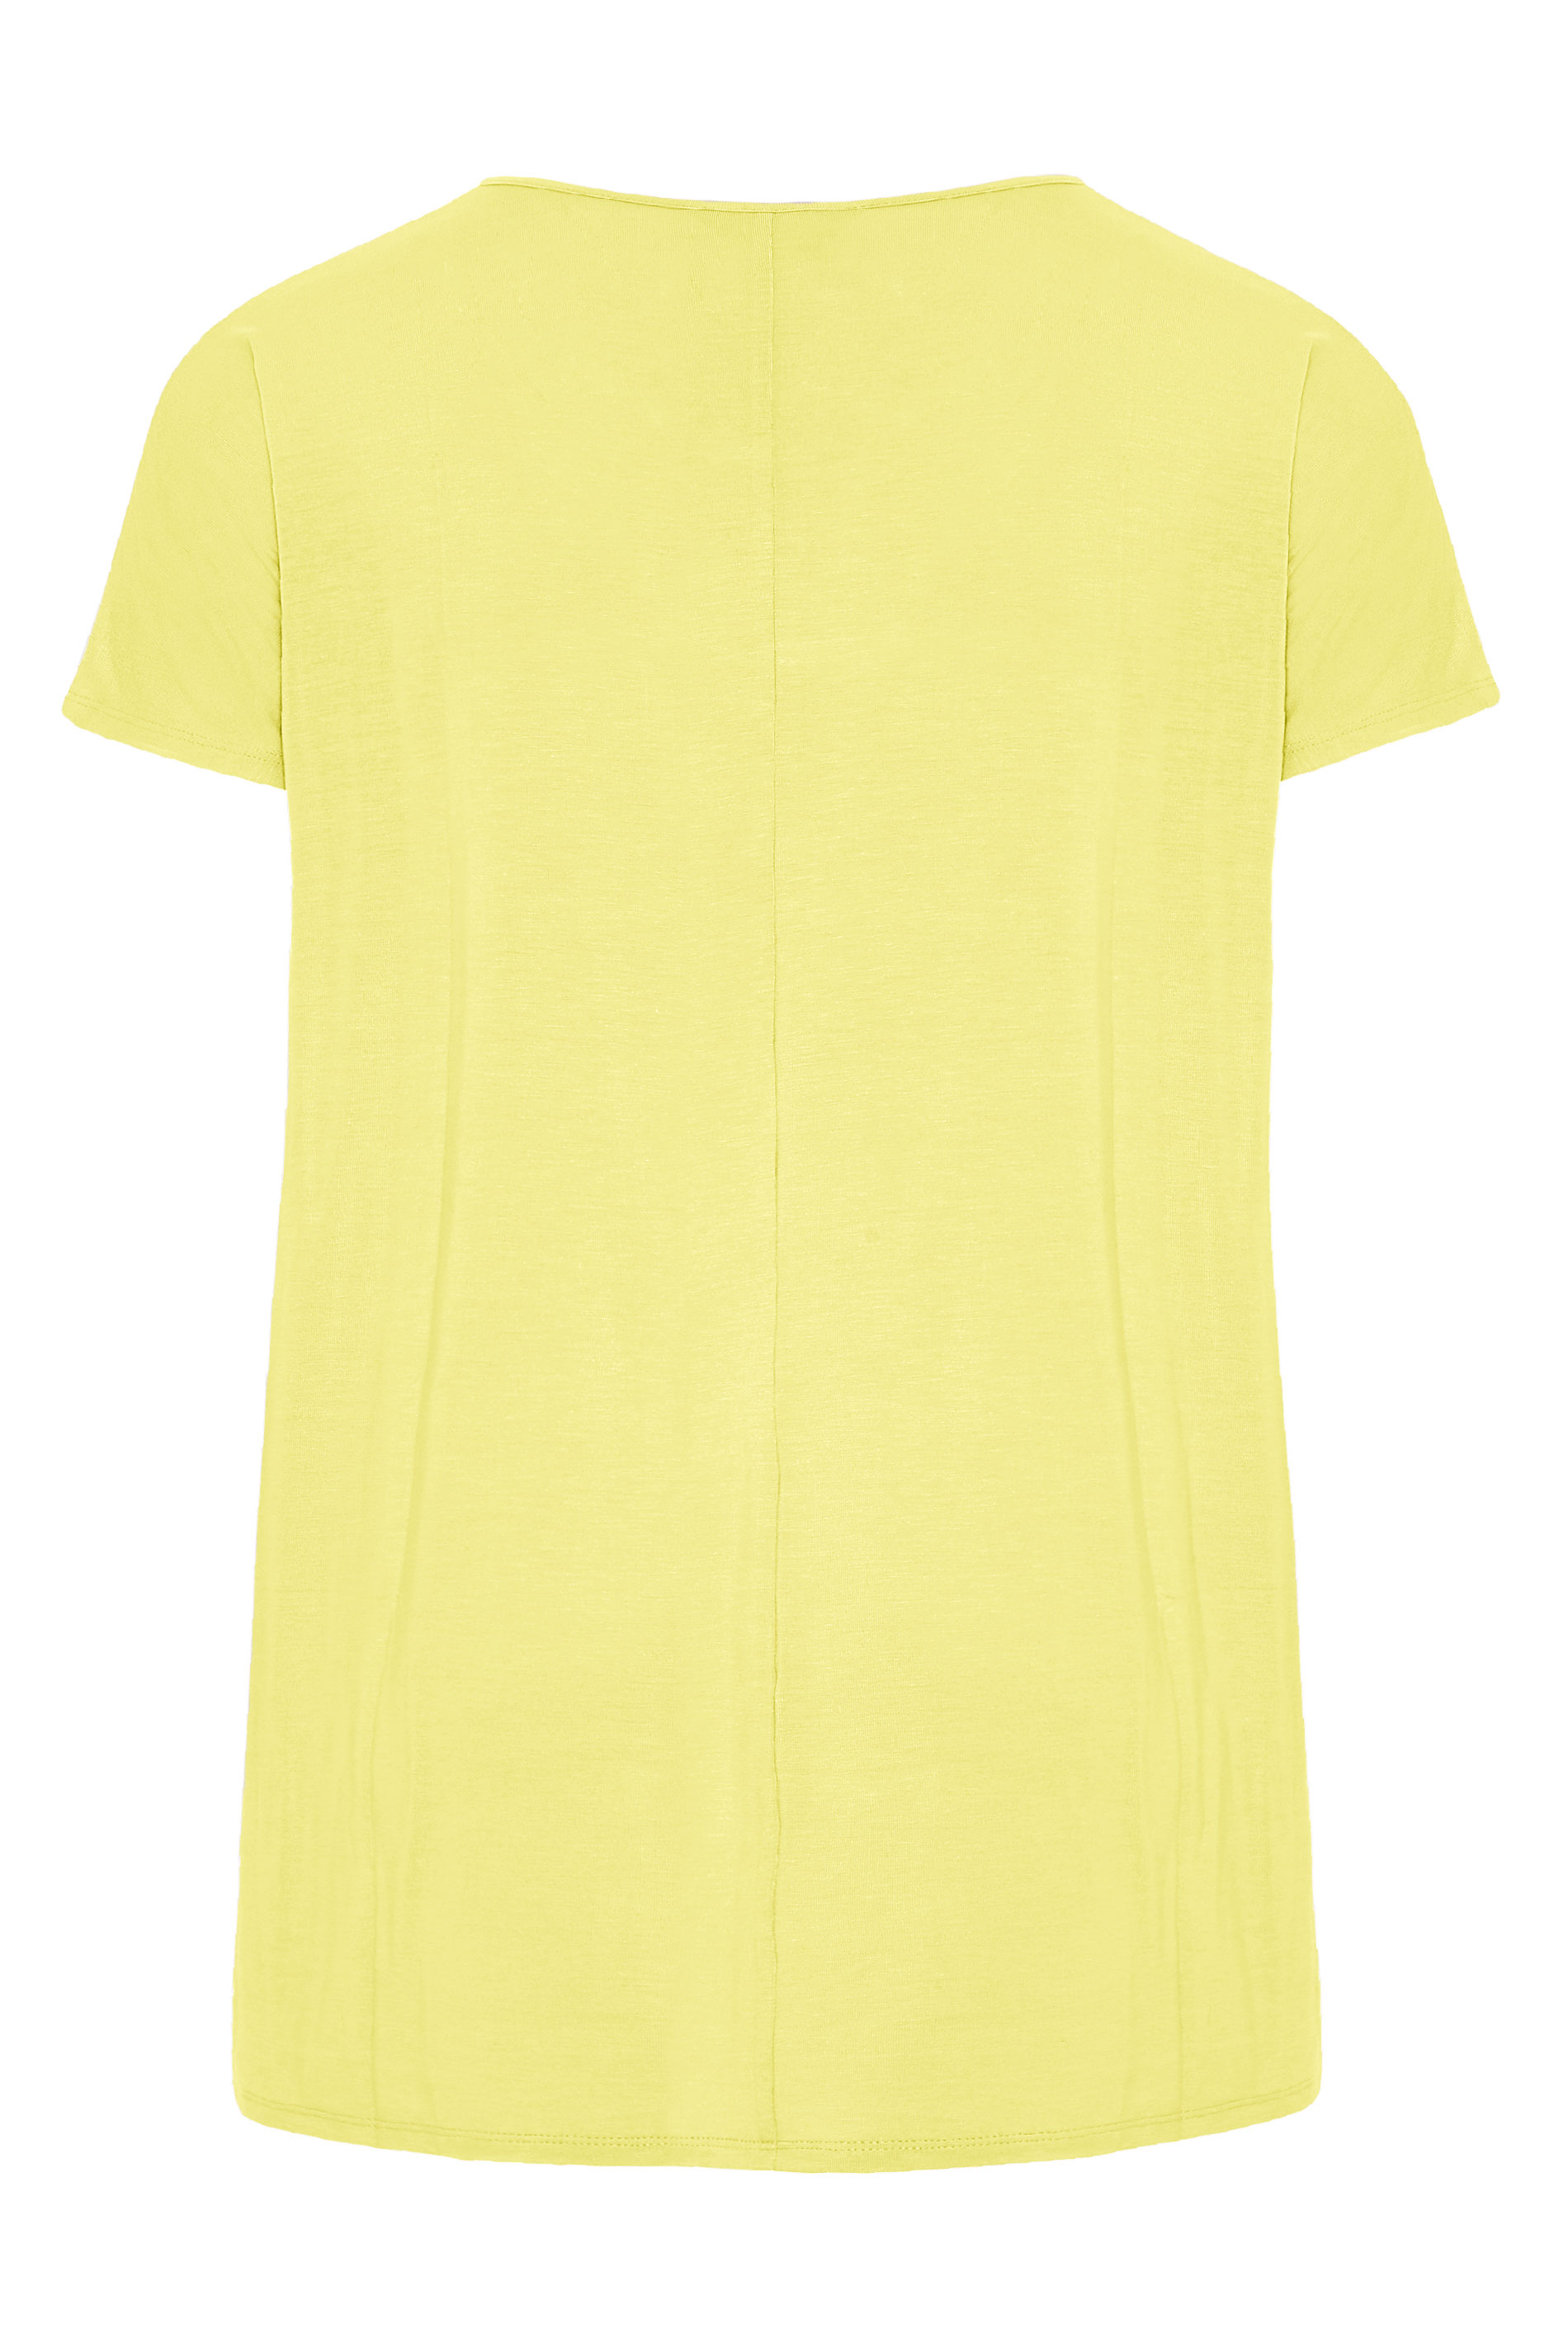 Lemon Yellow Grown on Sleeve T-Shirt | Yours Clothing